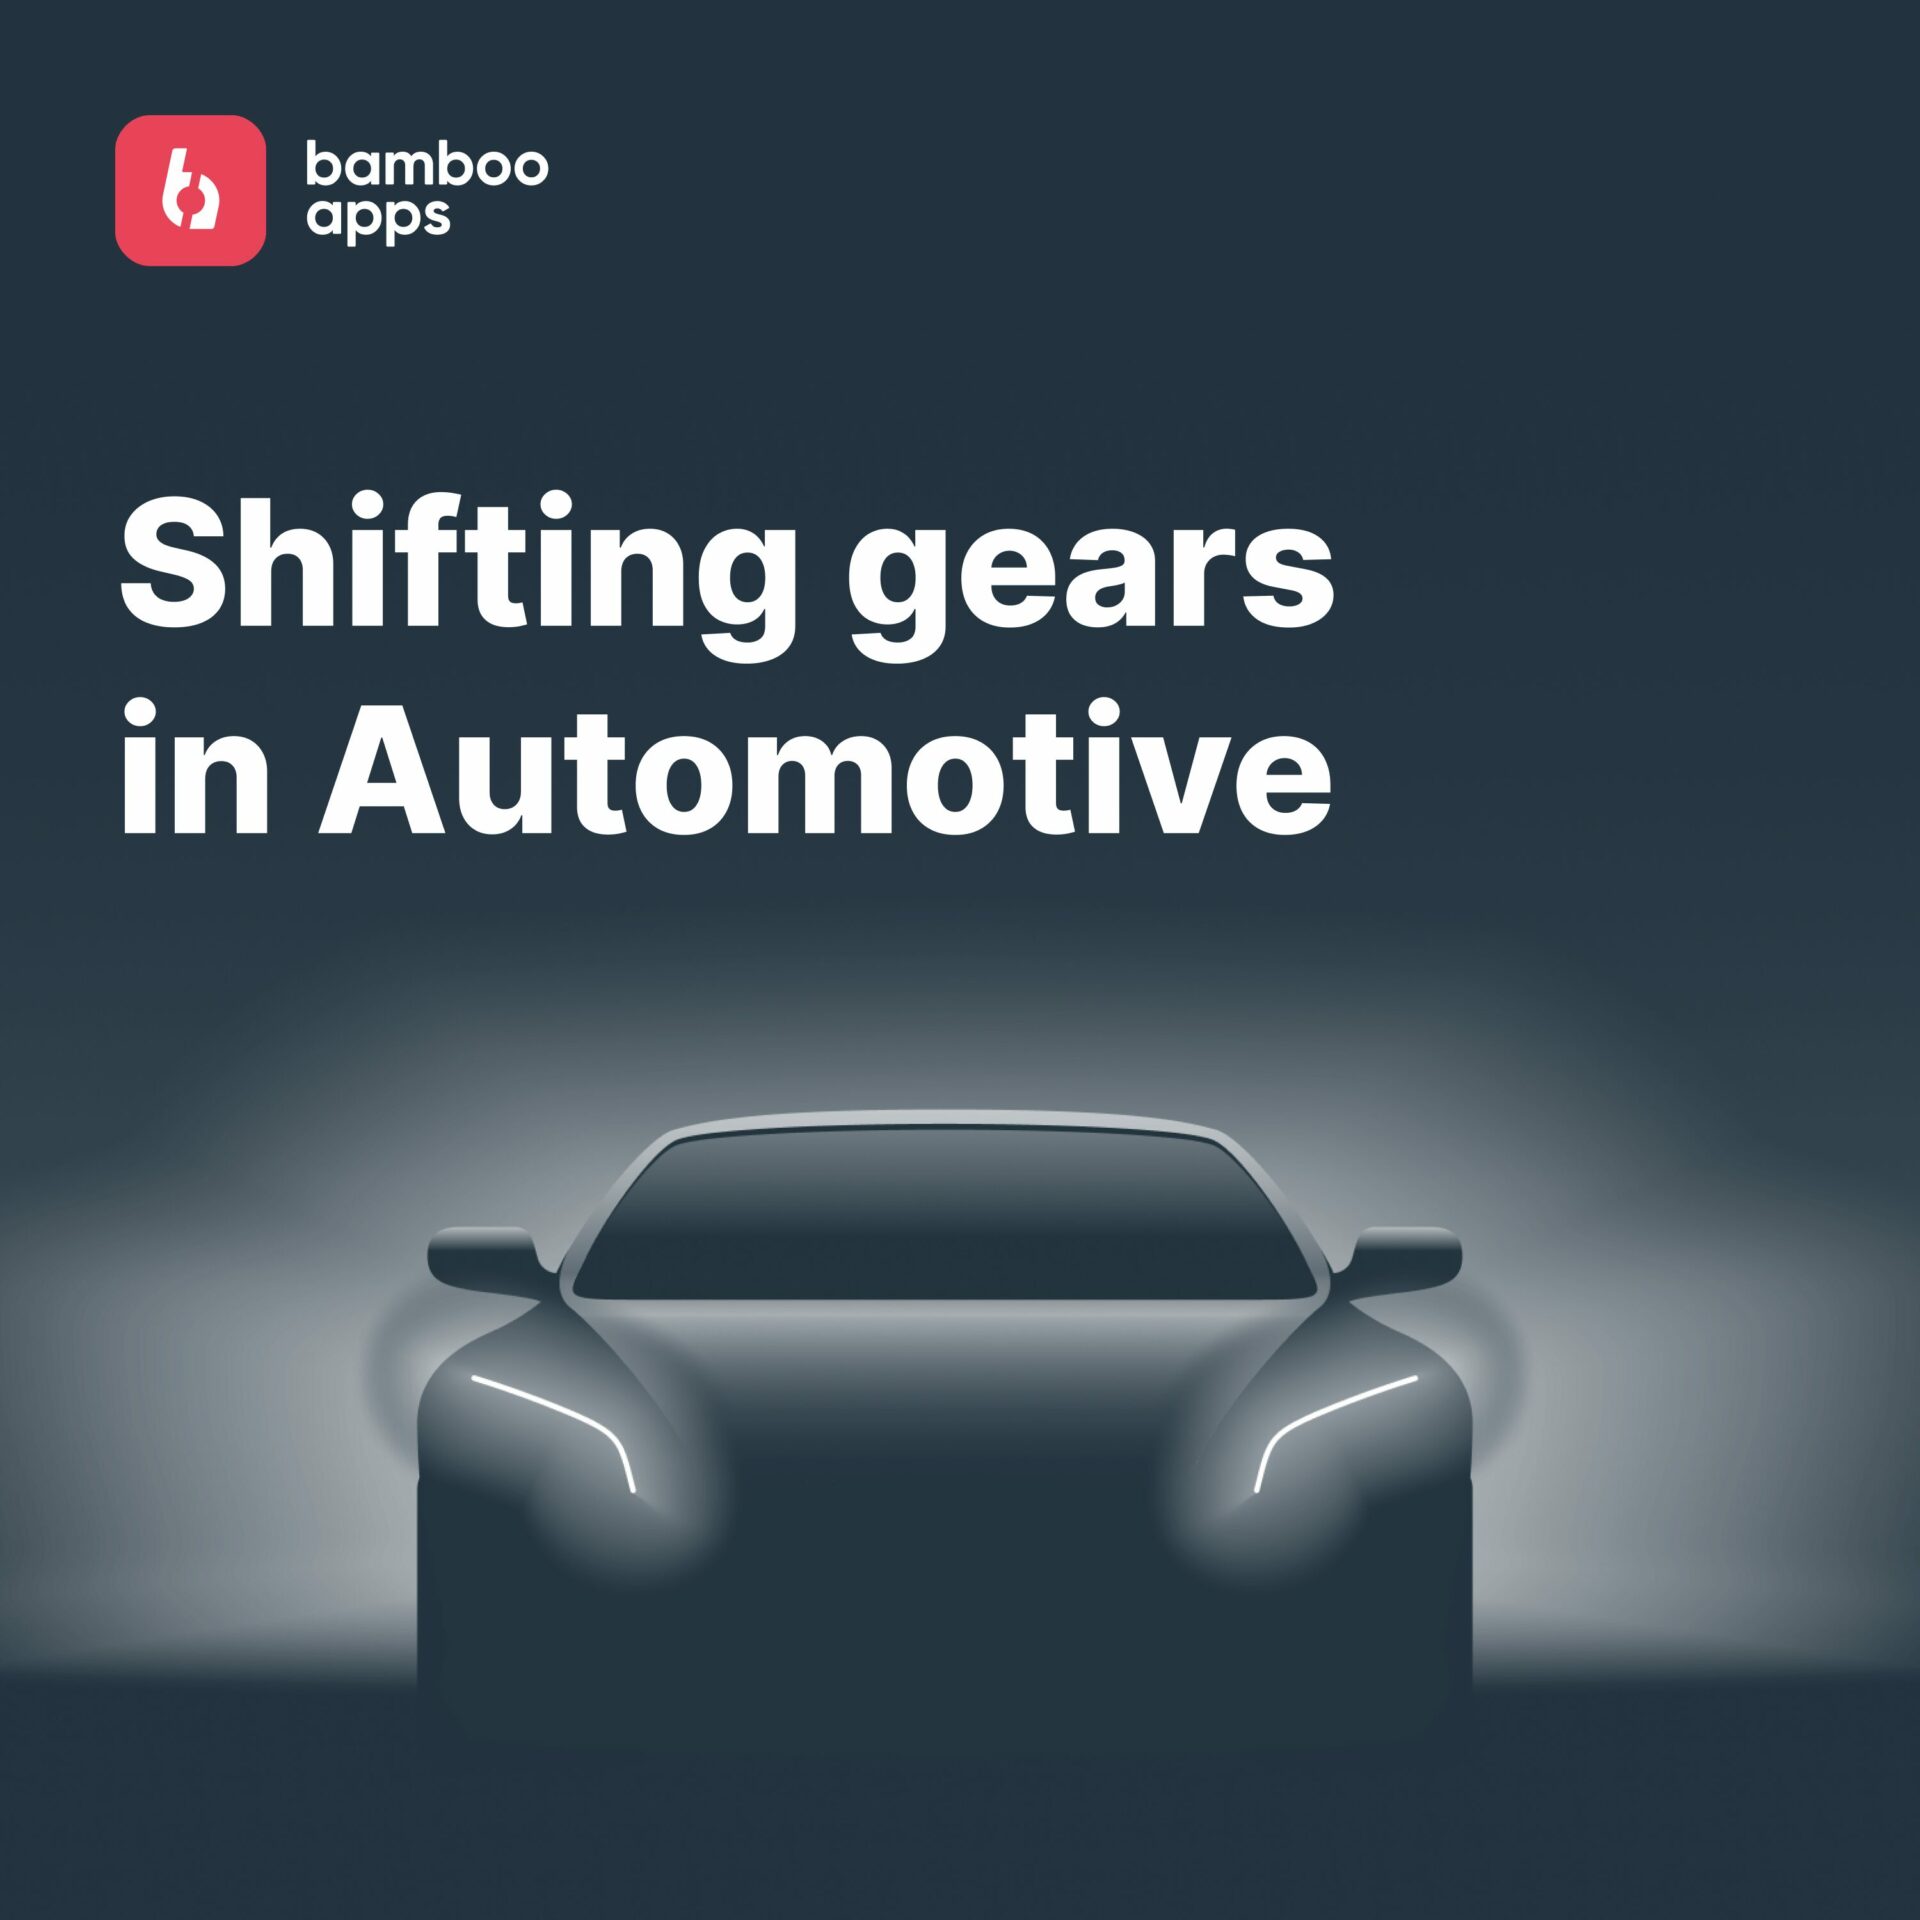 Shifting gears in Automotive